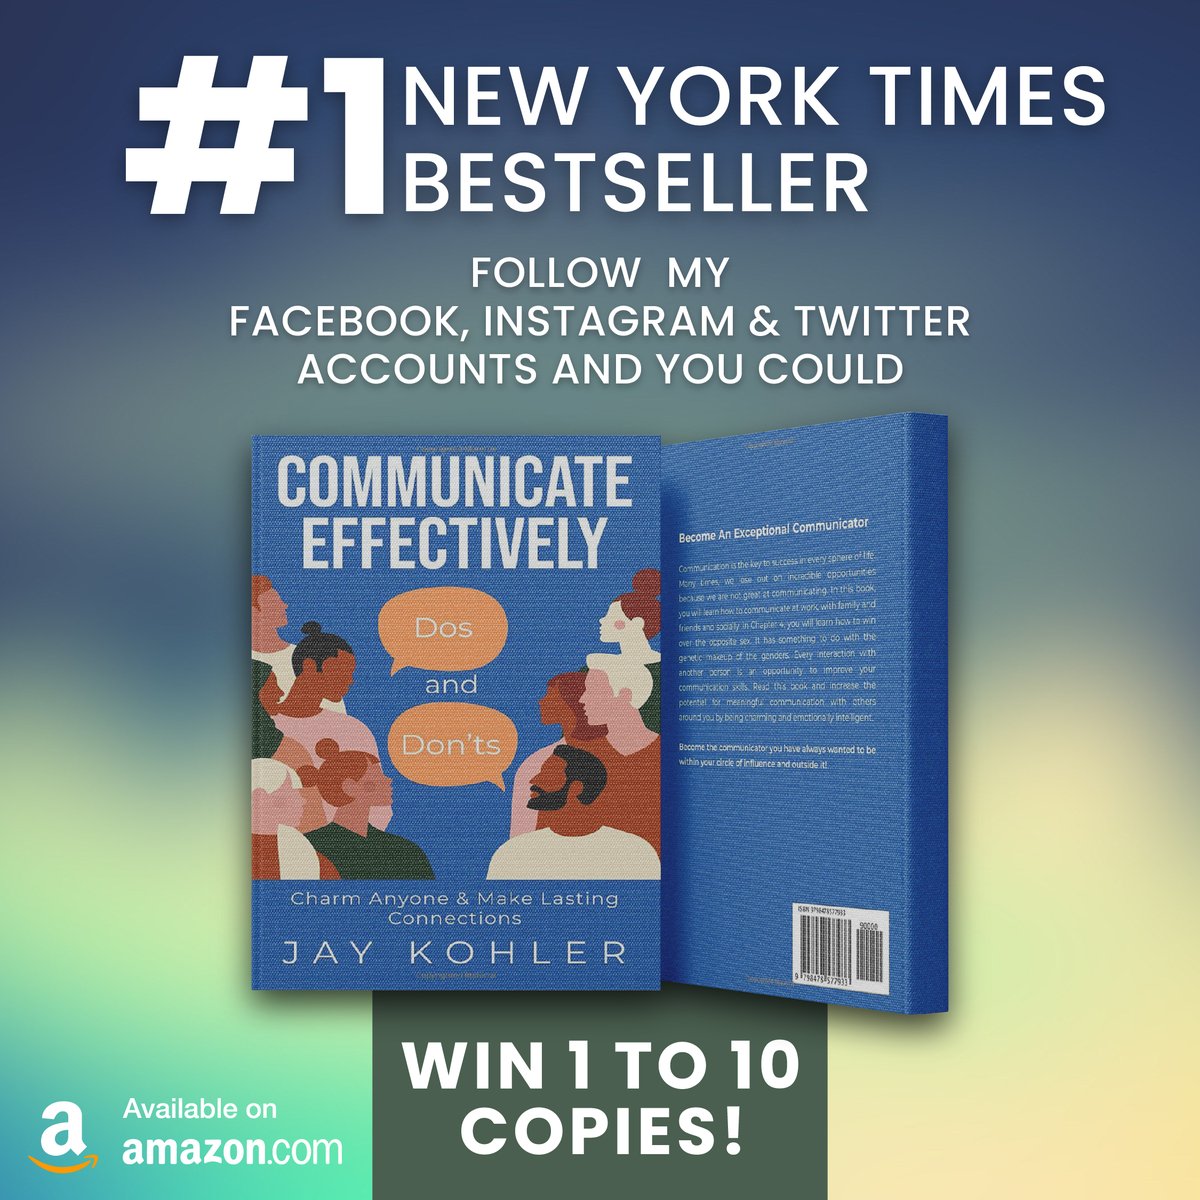 We are #celebrating the #paperback publication of #CommunicateEffectively by giving away 10 copies to our readers! To ##win a copy, please #subscribe to my social media pages. If you have already liked my pages, you are automatically entered into the #giveaway.